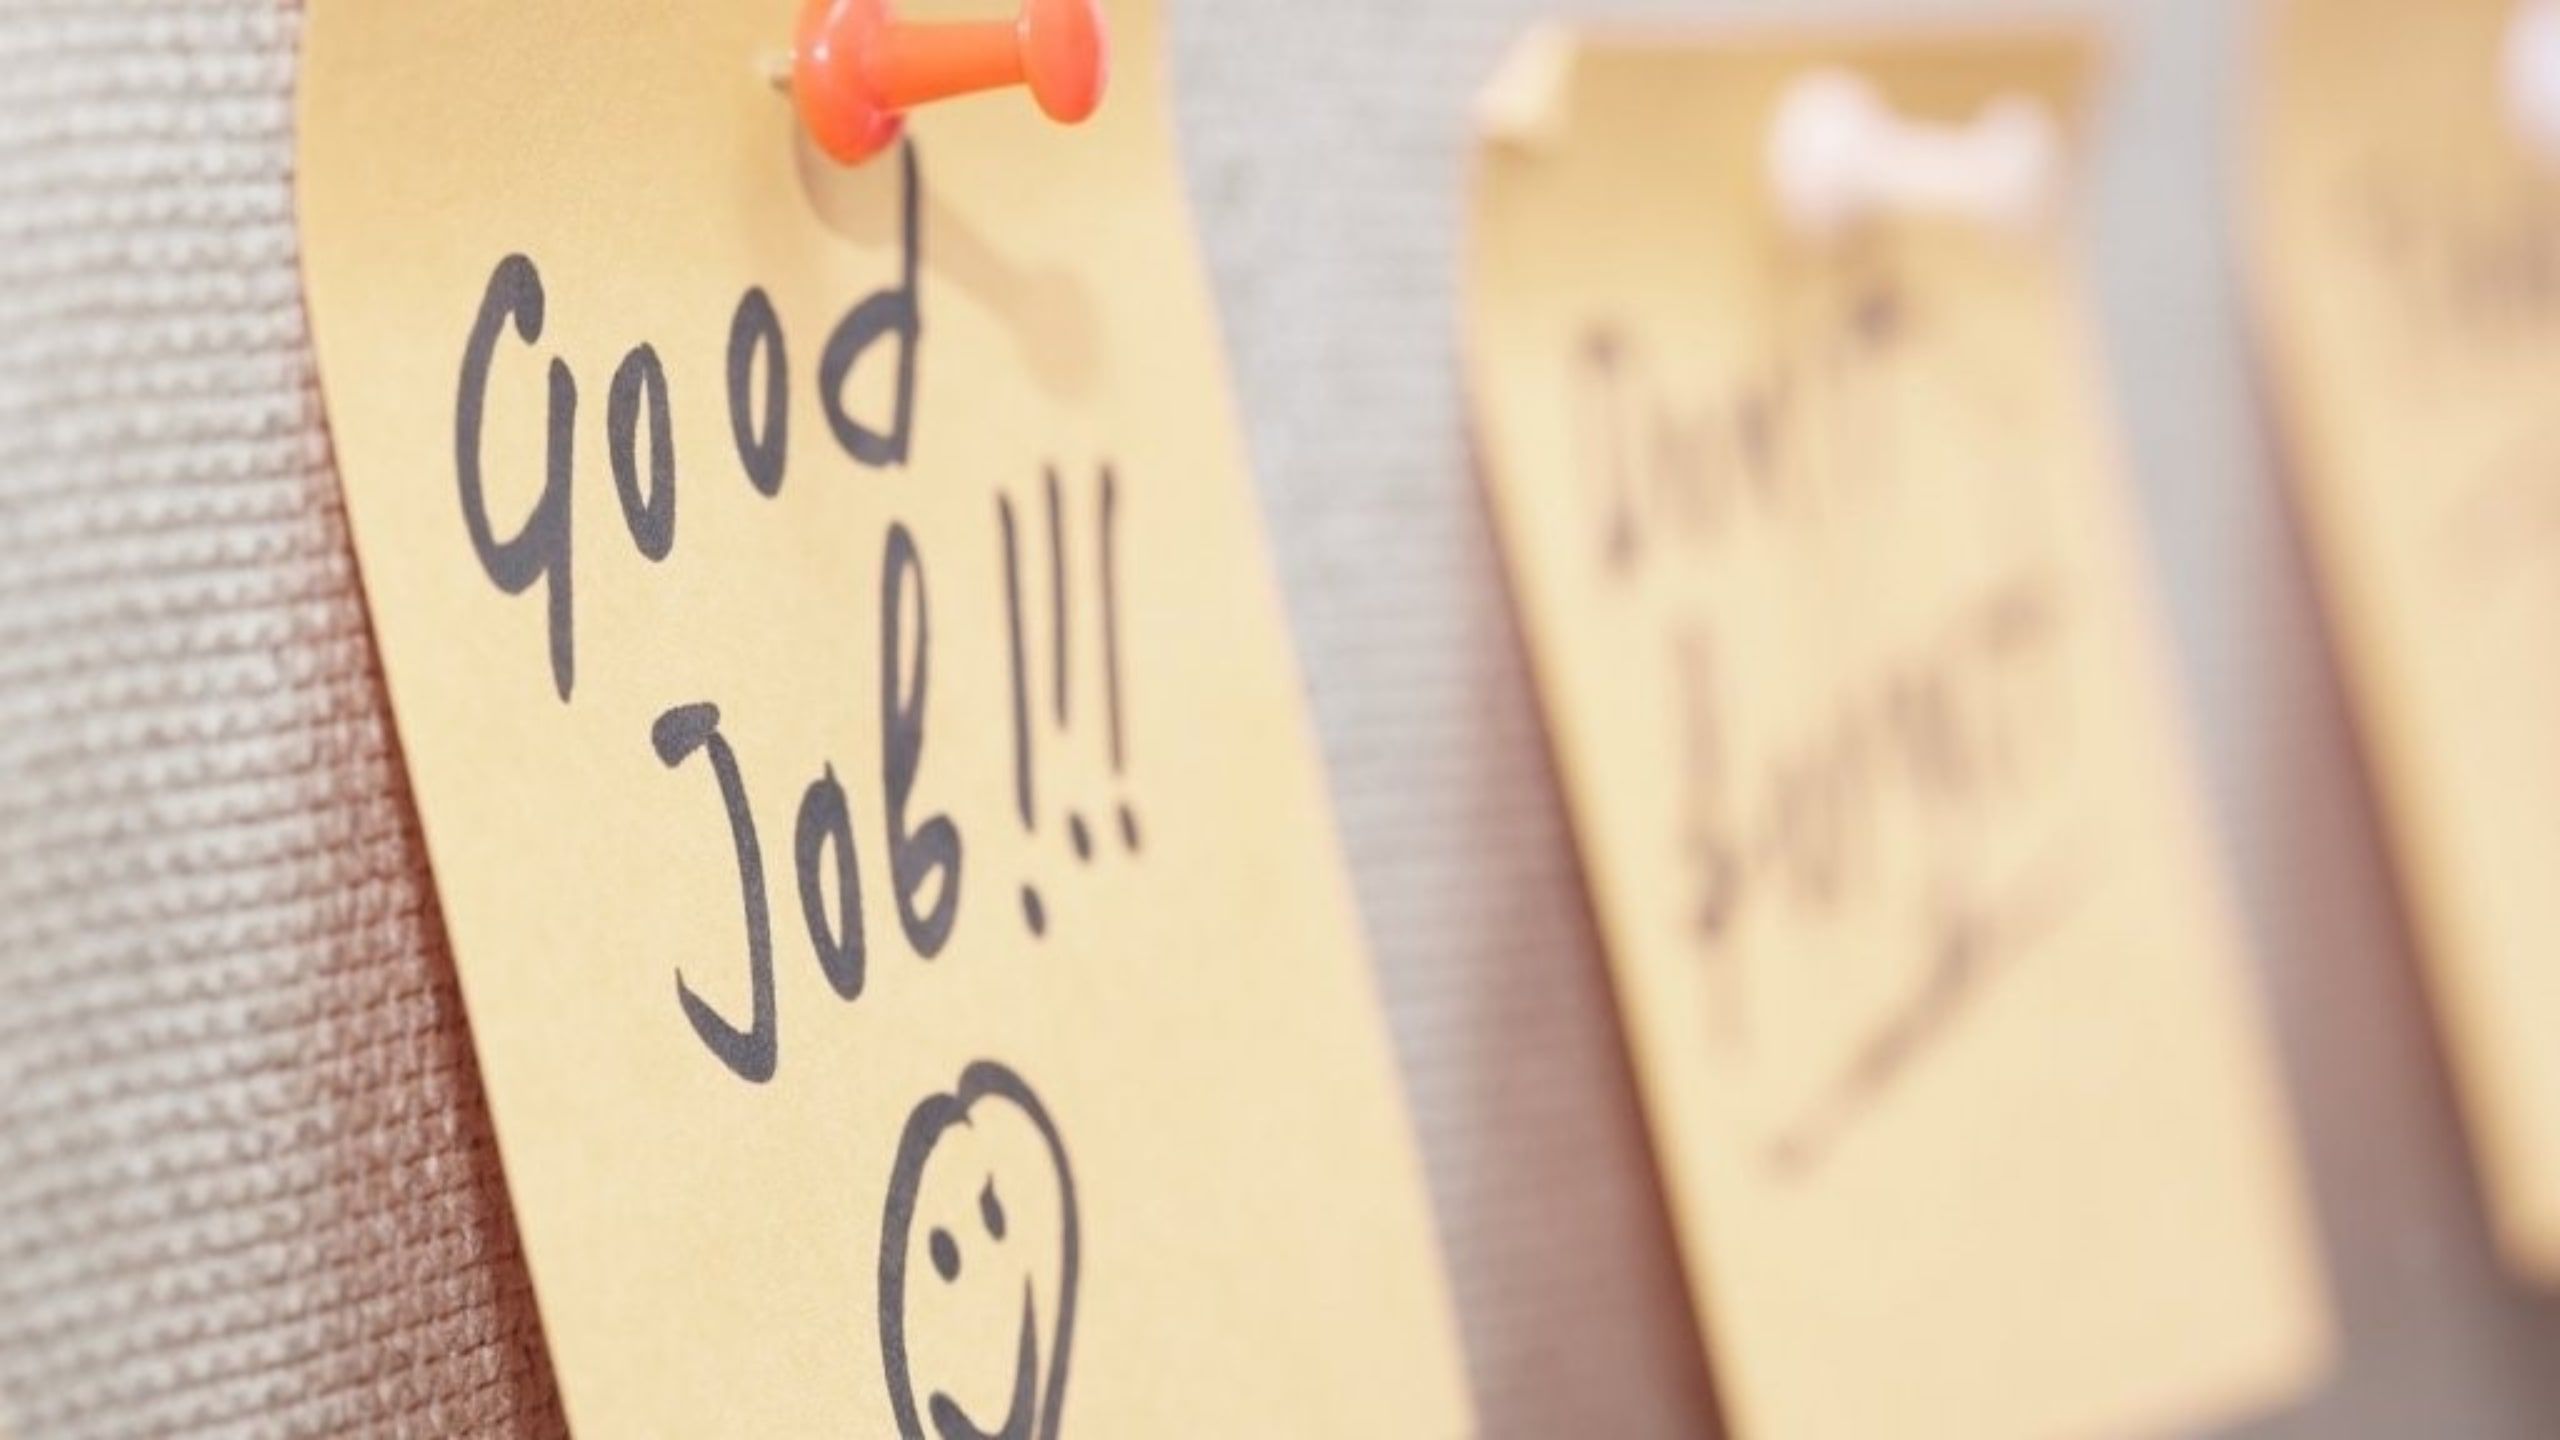 a note says good job to motivate employees, setup for Employee Recognition Program 